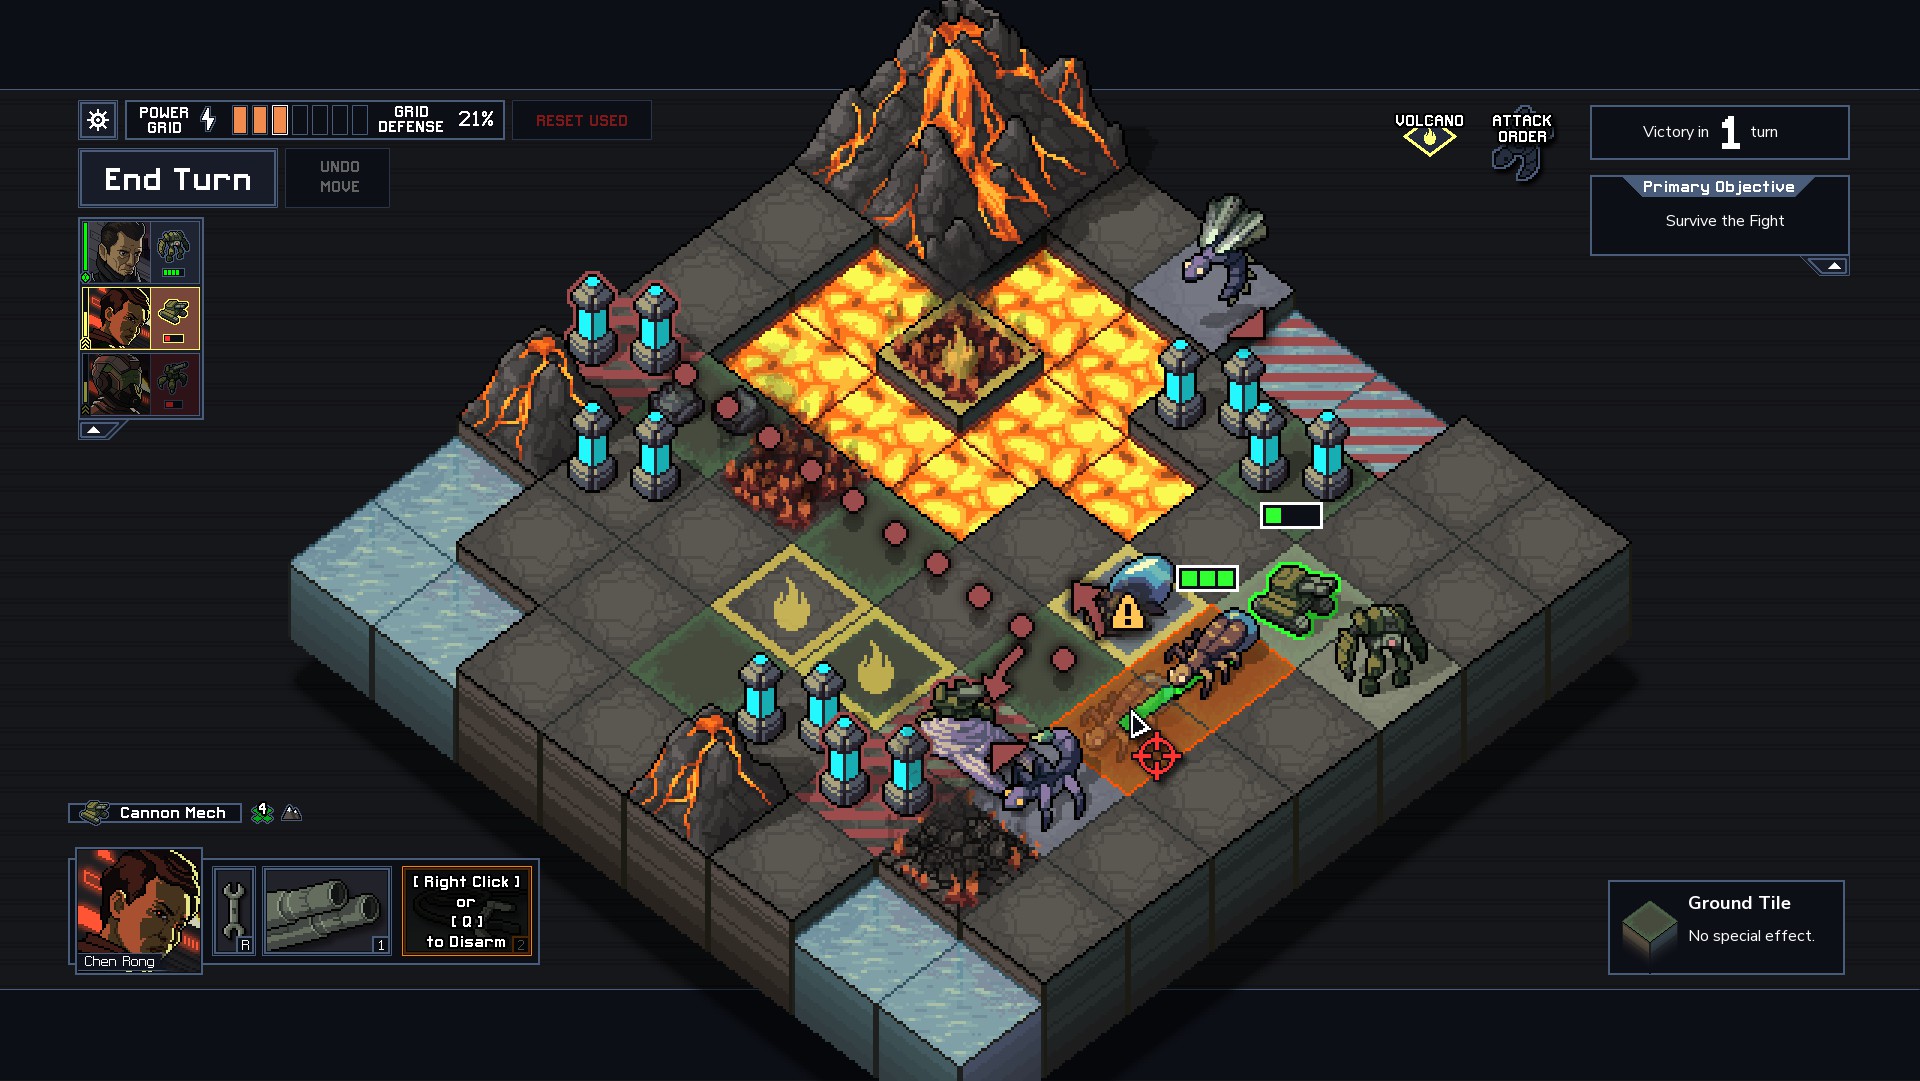 Into the Breach download the last version for apple